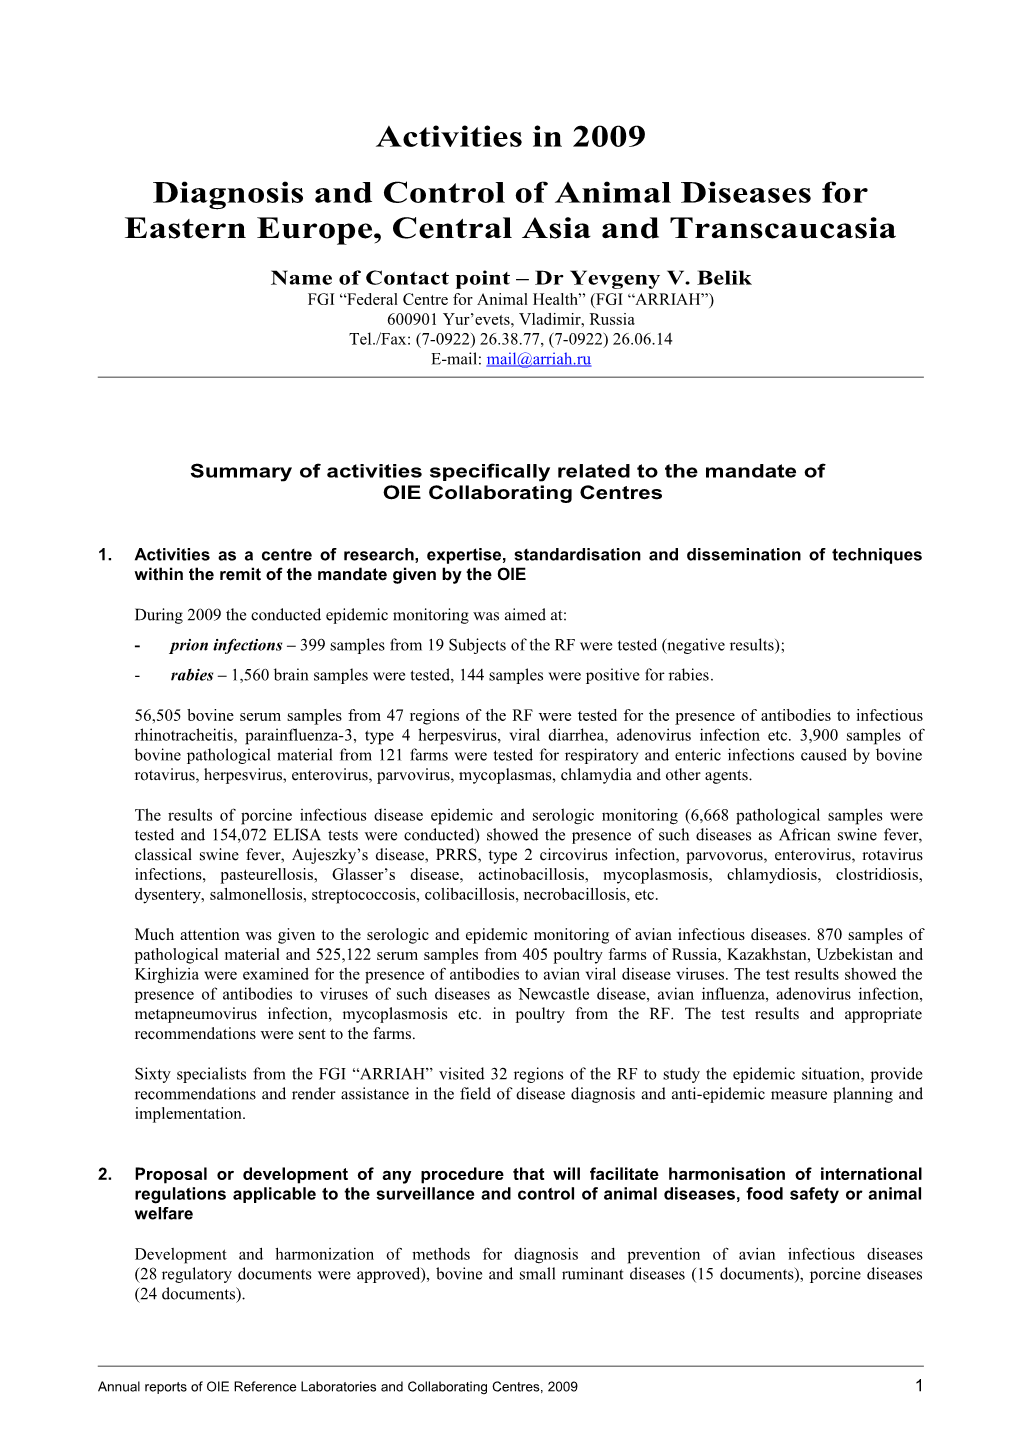 Diagnosis and Control of Animal Diseases in Eastern Europe, Central Asia and Transcaucasia